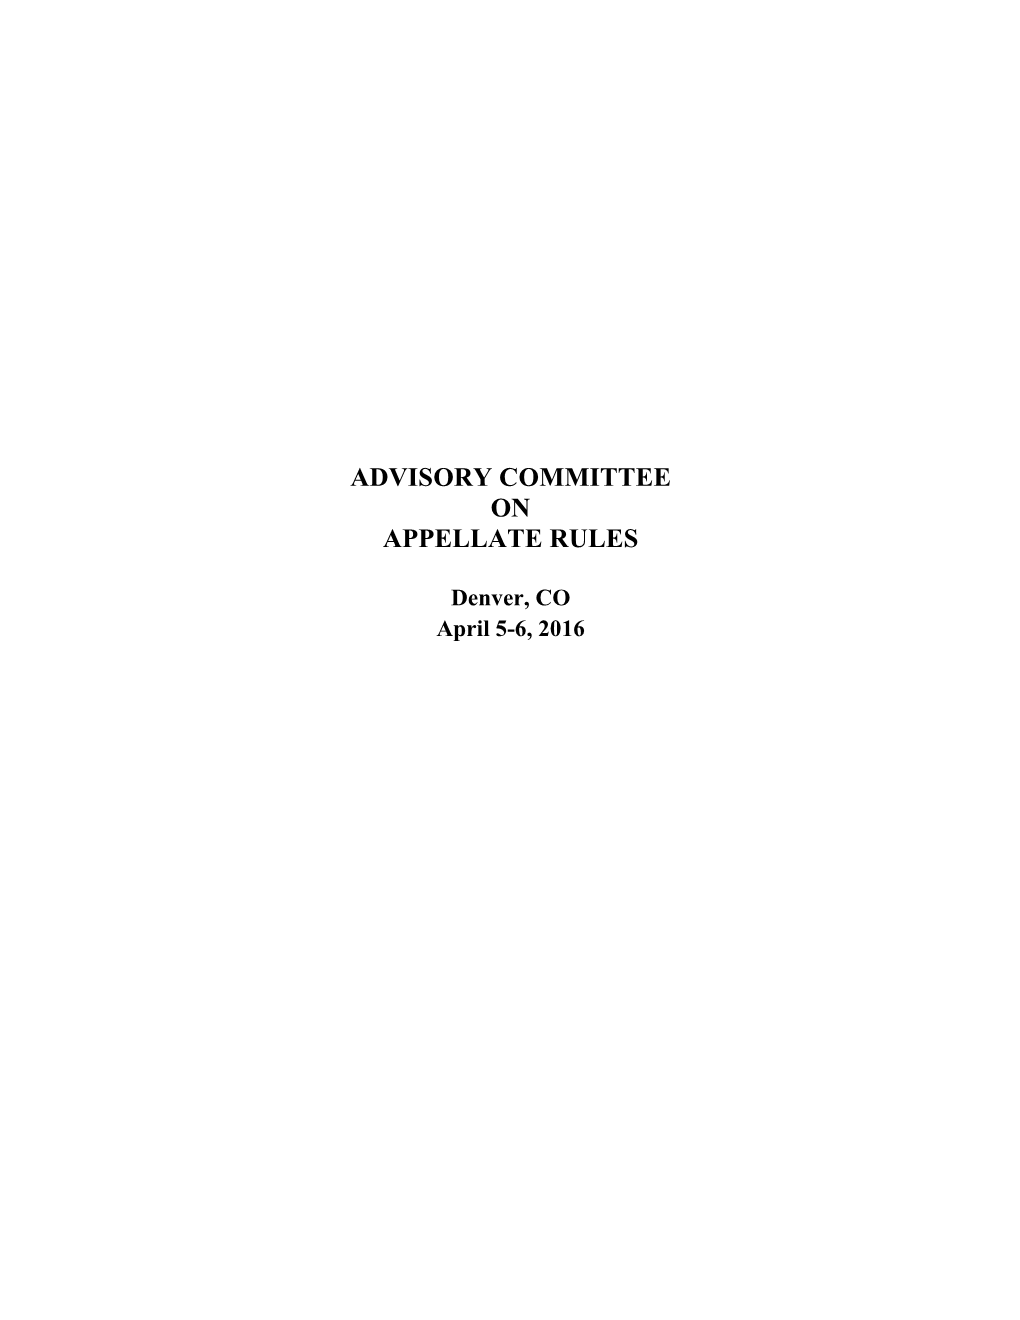 Advisory Committee on Appellate Rules